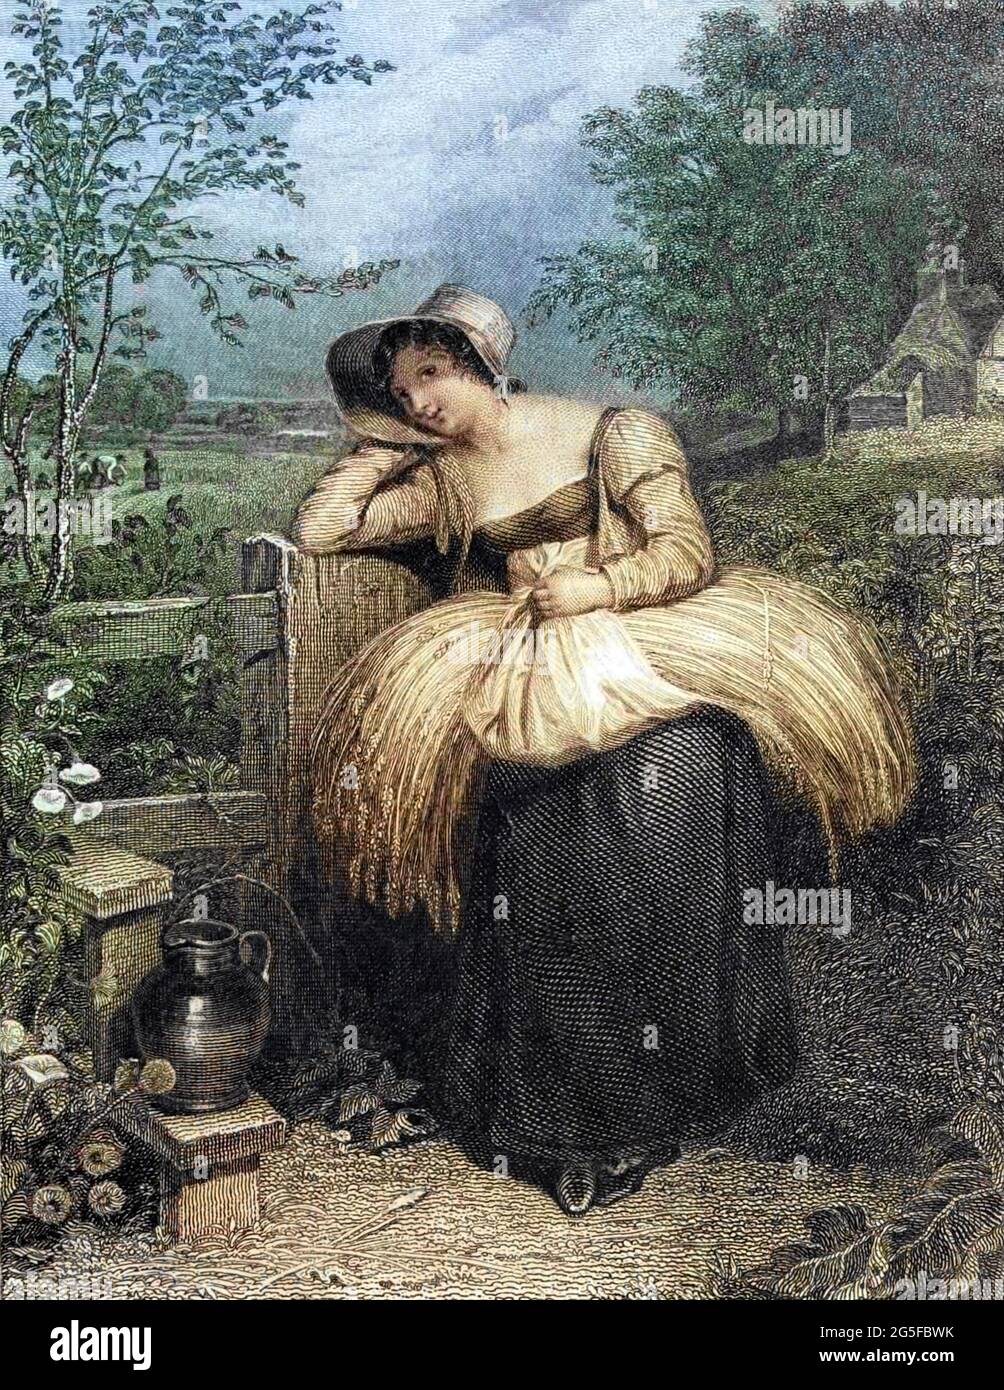 Machine colorised Country Girl illustrating the story ' On Love ' from The Keepsake of 1829. The Keepsake was an English literary annual which ran from 1828 to 1857, published each Christmas from 1827 to 1856, for perusal during the year of the title. Like other literary annuals, The Keepsake was an anthology of short fiction, poetry, essays, and engraved illustrations. It was a gift book designed to appeal to young women, and was distinctive for its binding of scarlet dress silk and the quality of its illustrations. Although the literature in The Keepsake and other annuals is often regarded a Stock Photo